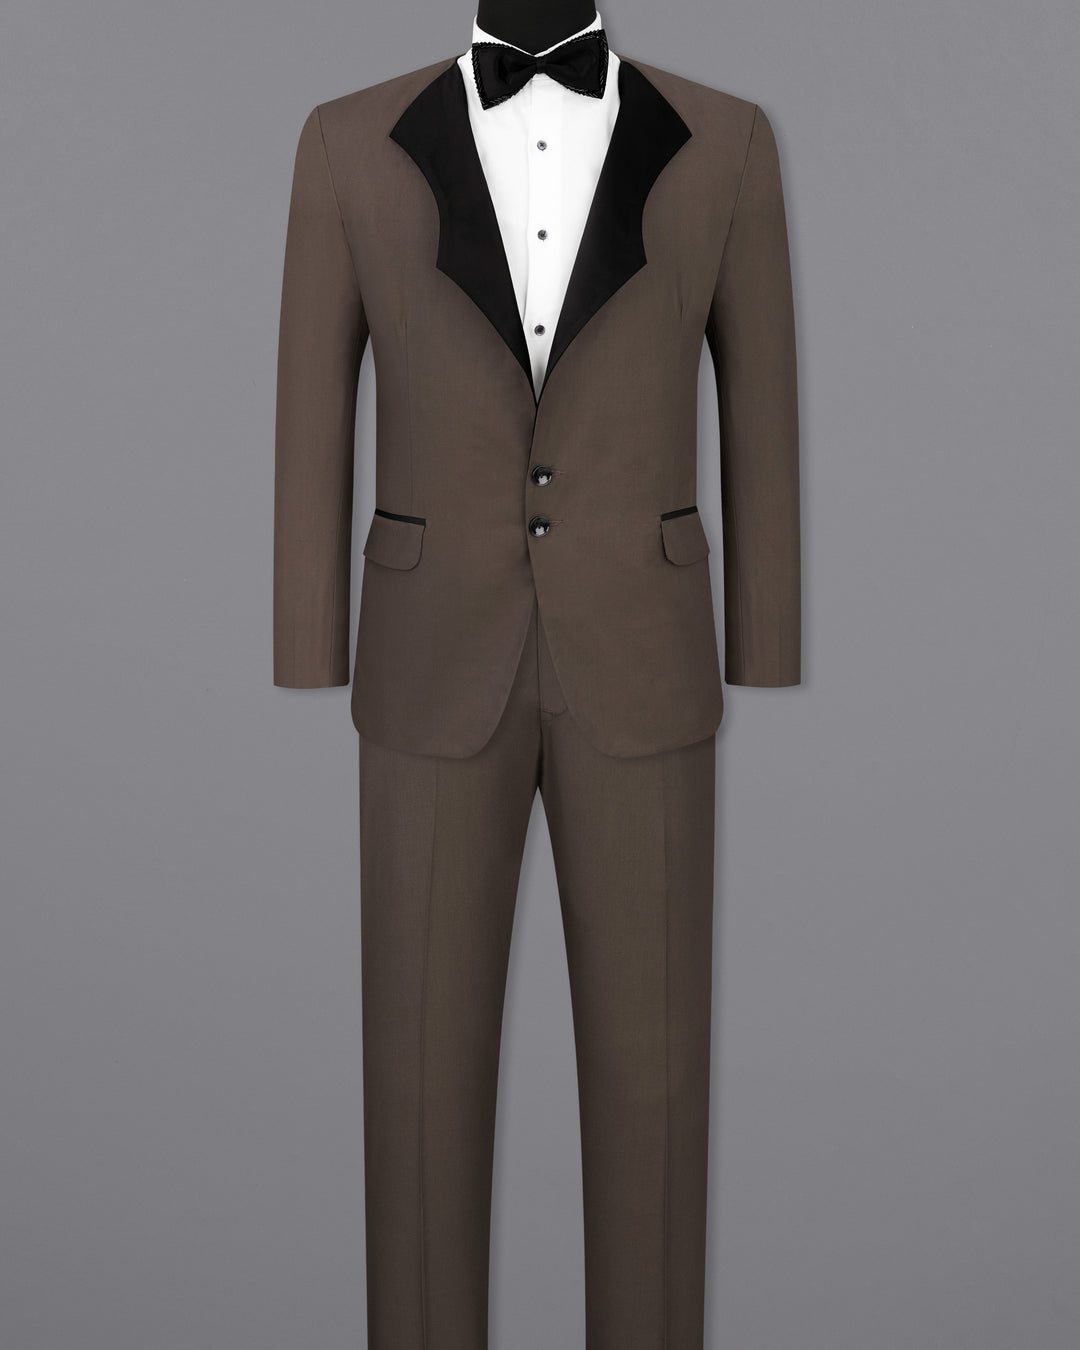 Partywear tuxedo suit for new year